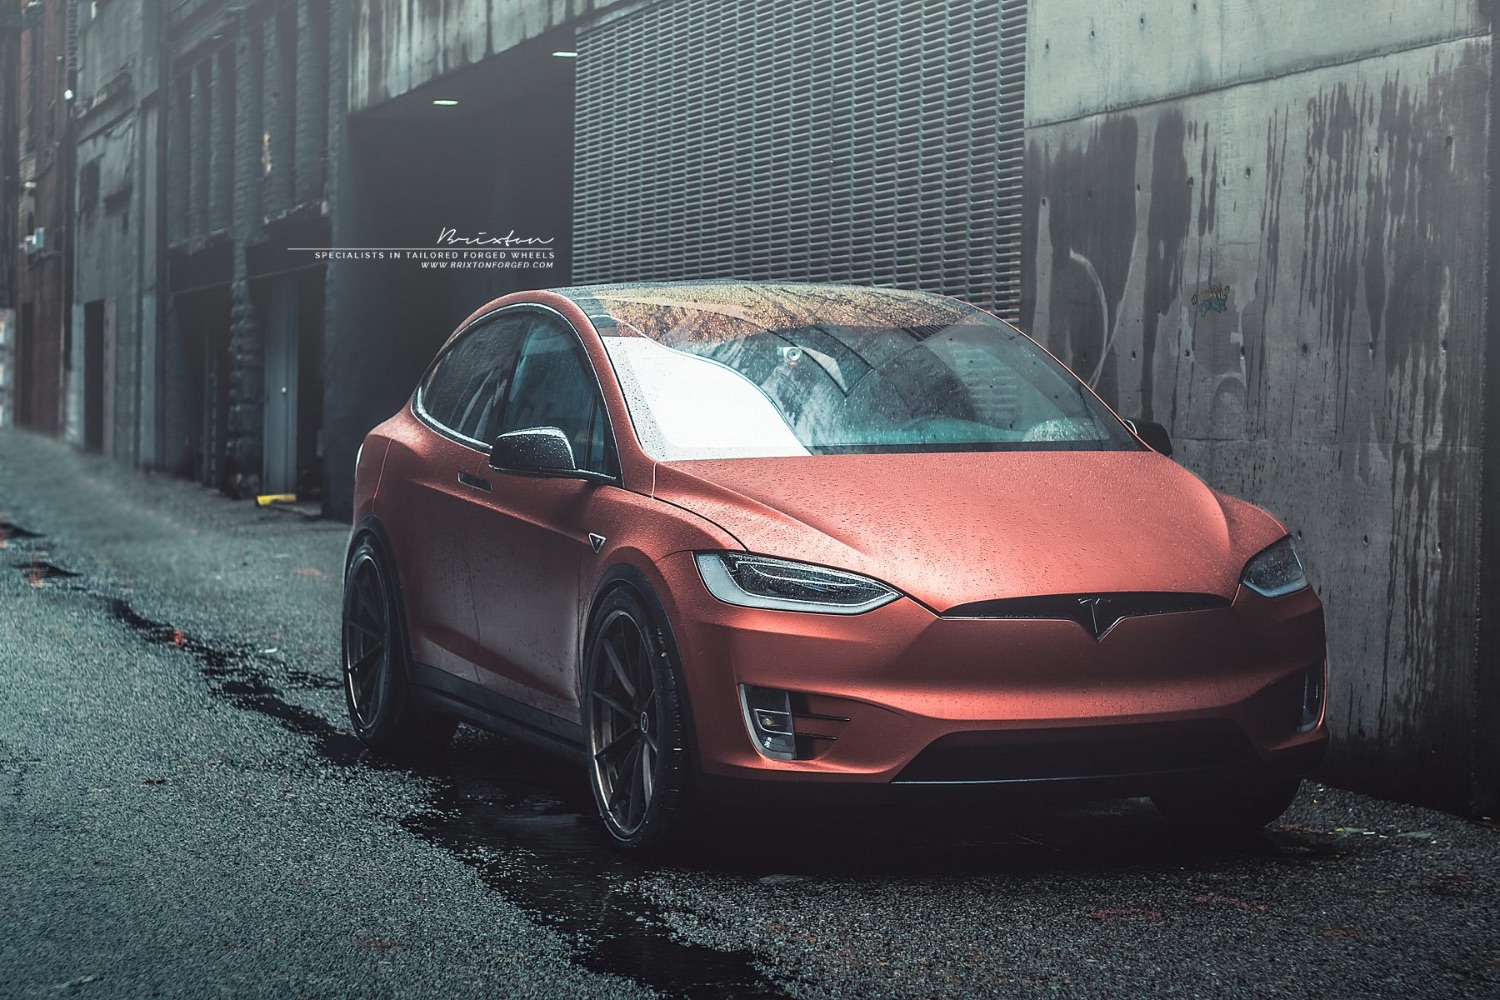 brixton-forged-red-tesla-model-x-wheels-brixton-forged-wr3-targa-series-22-inch-concave-3-piece-forged-bronze-9-1800x1200